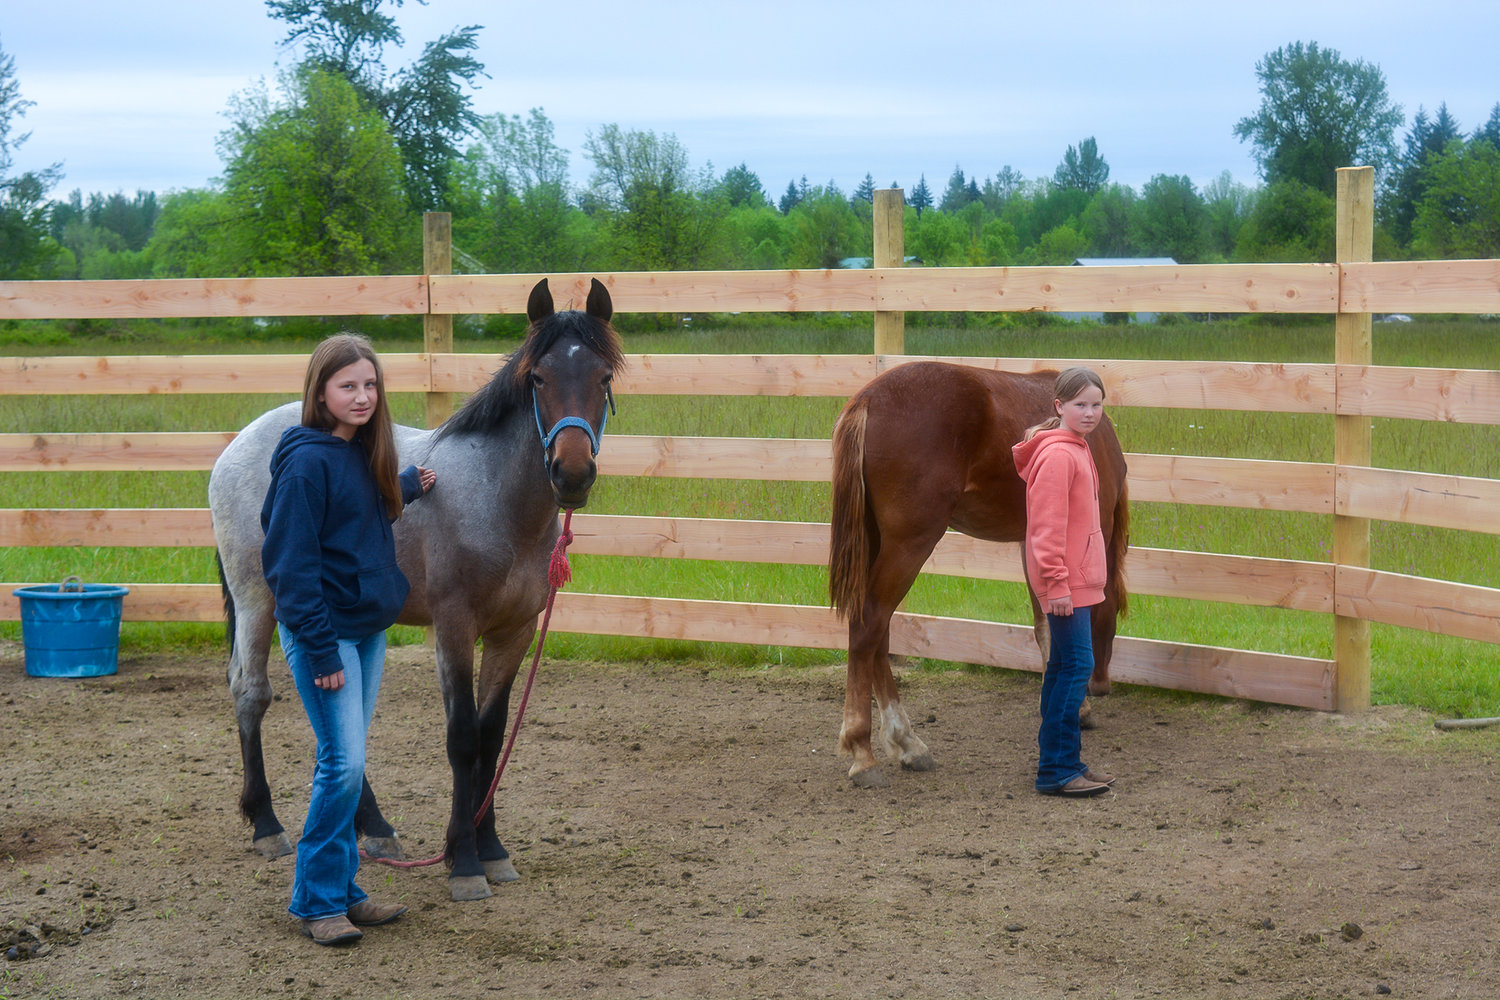 Norah Garlington and her horse Baileymay, left, and Claire Garlington with her horse Albin, right, are pictured at the stable at their home in Battle Ground on May 24.